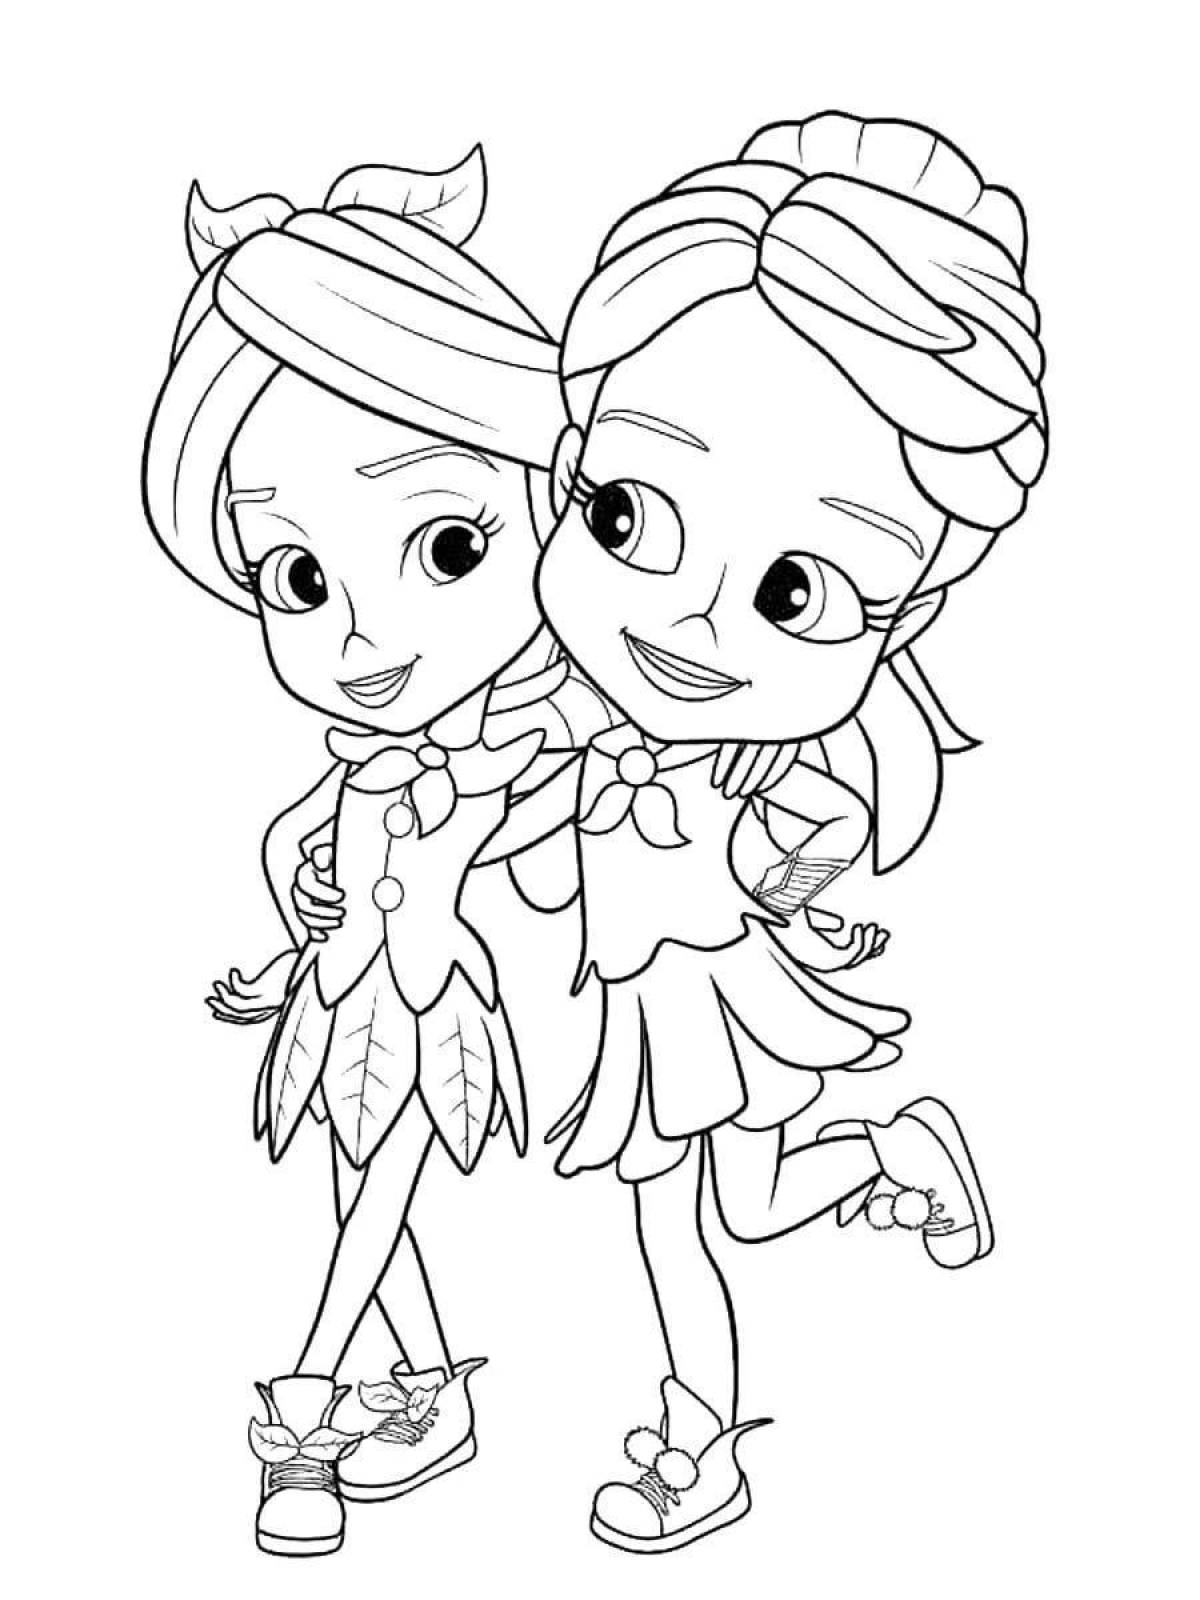 Outstanding patrol coloring page for 6-7 year olds